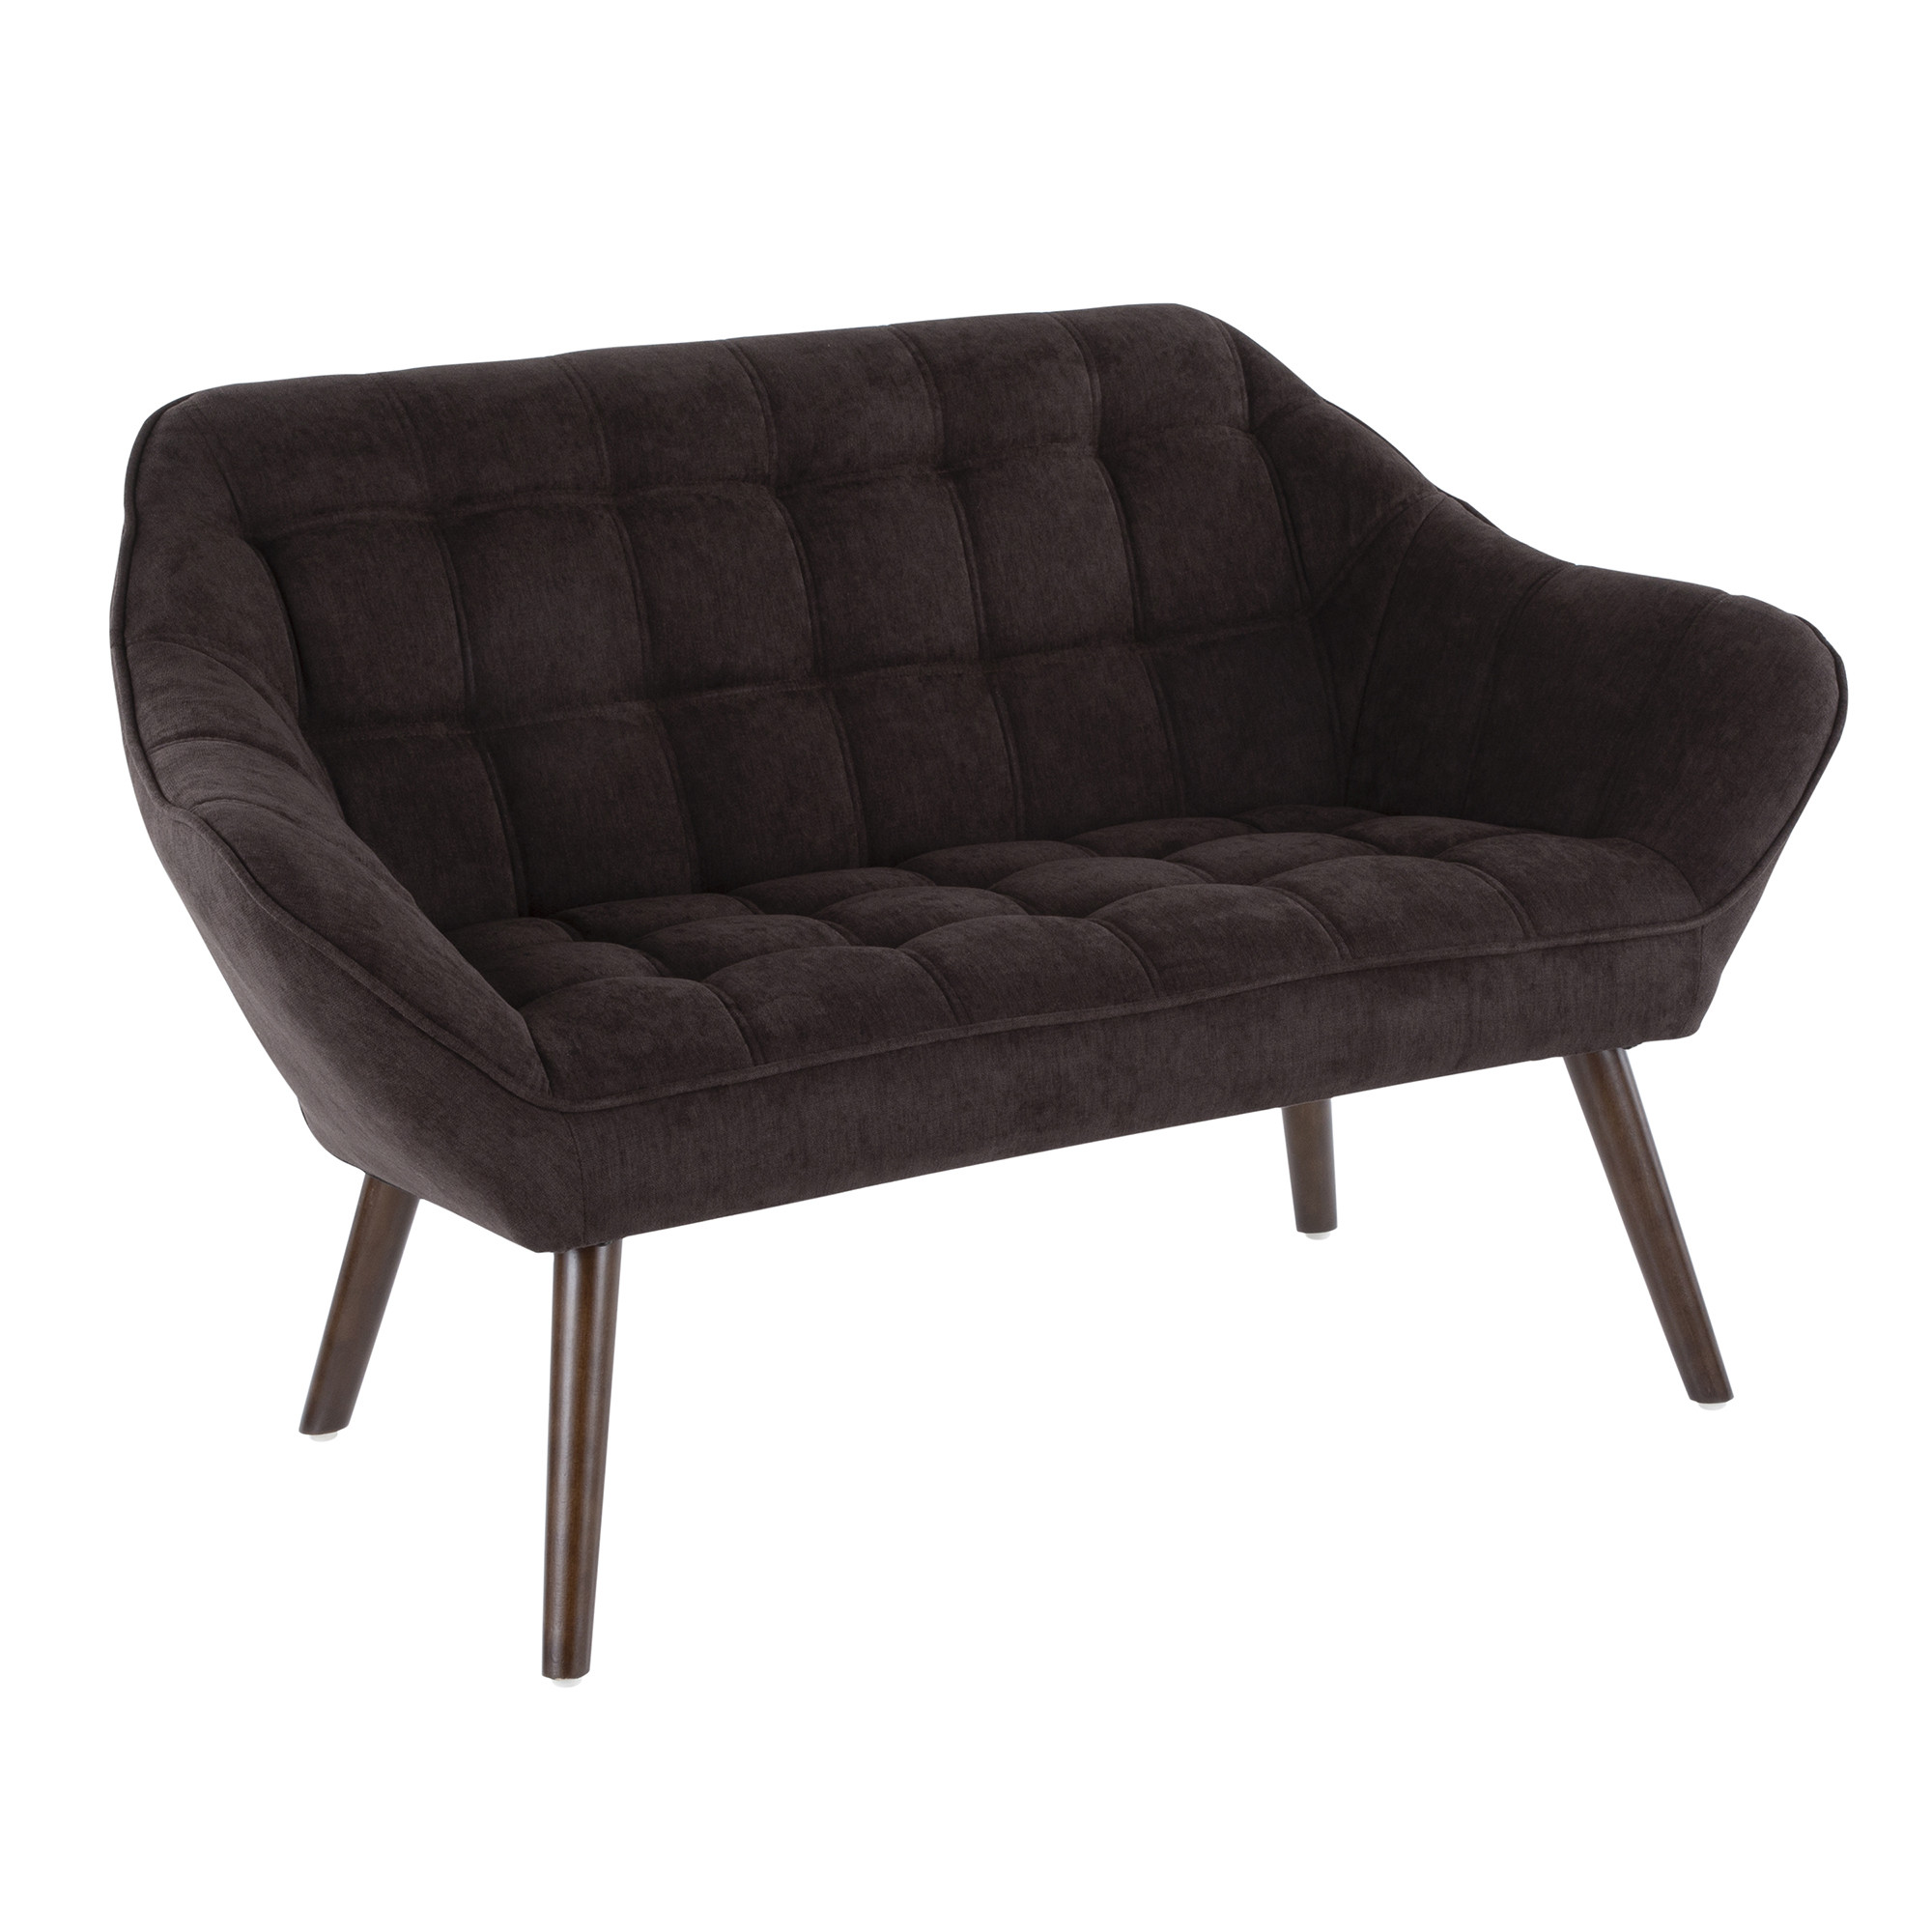 Boulder Mid-century Modern Love Seat In Charcoal Fabric - Lumisource C50-boulder Cha